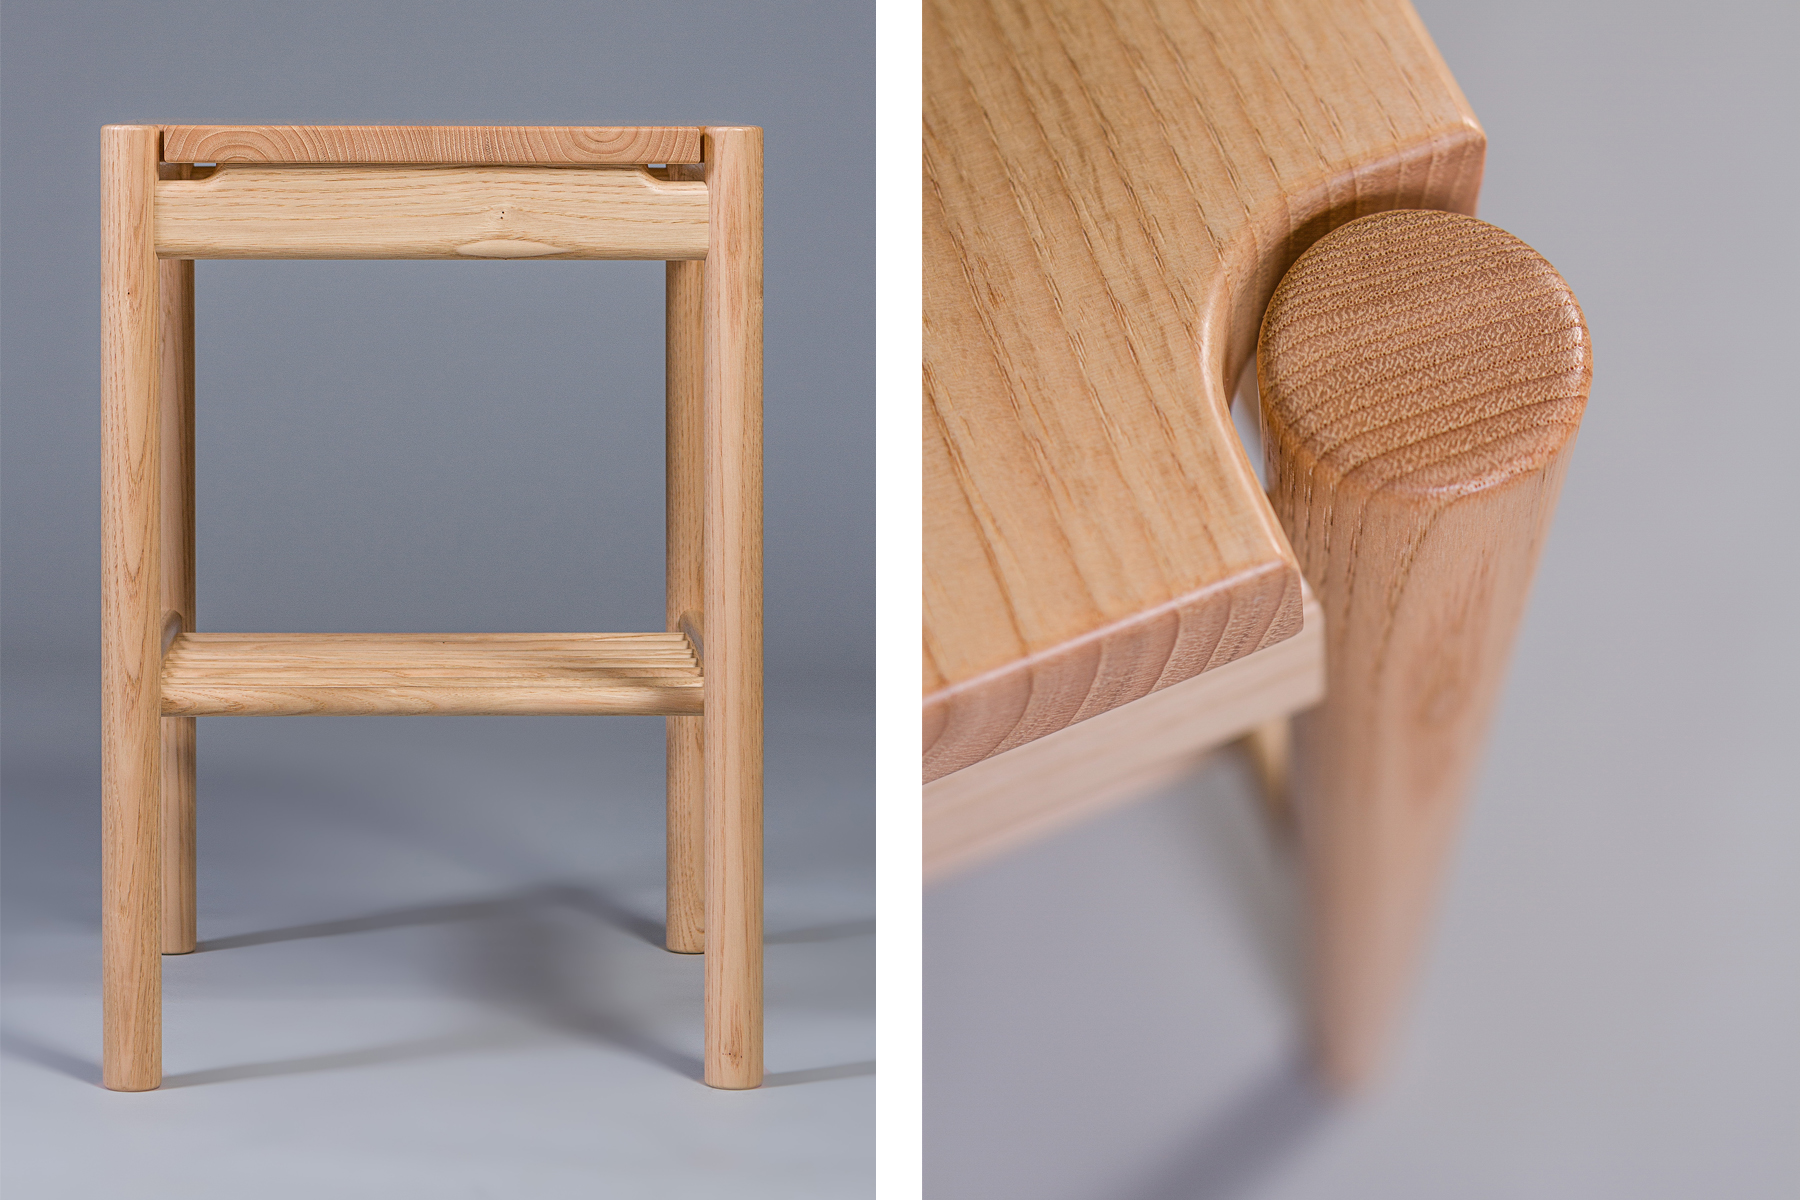 cut out detail on sweet chestnut bed side night stand